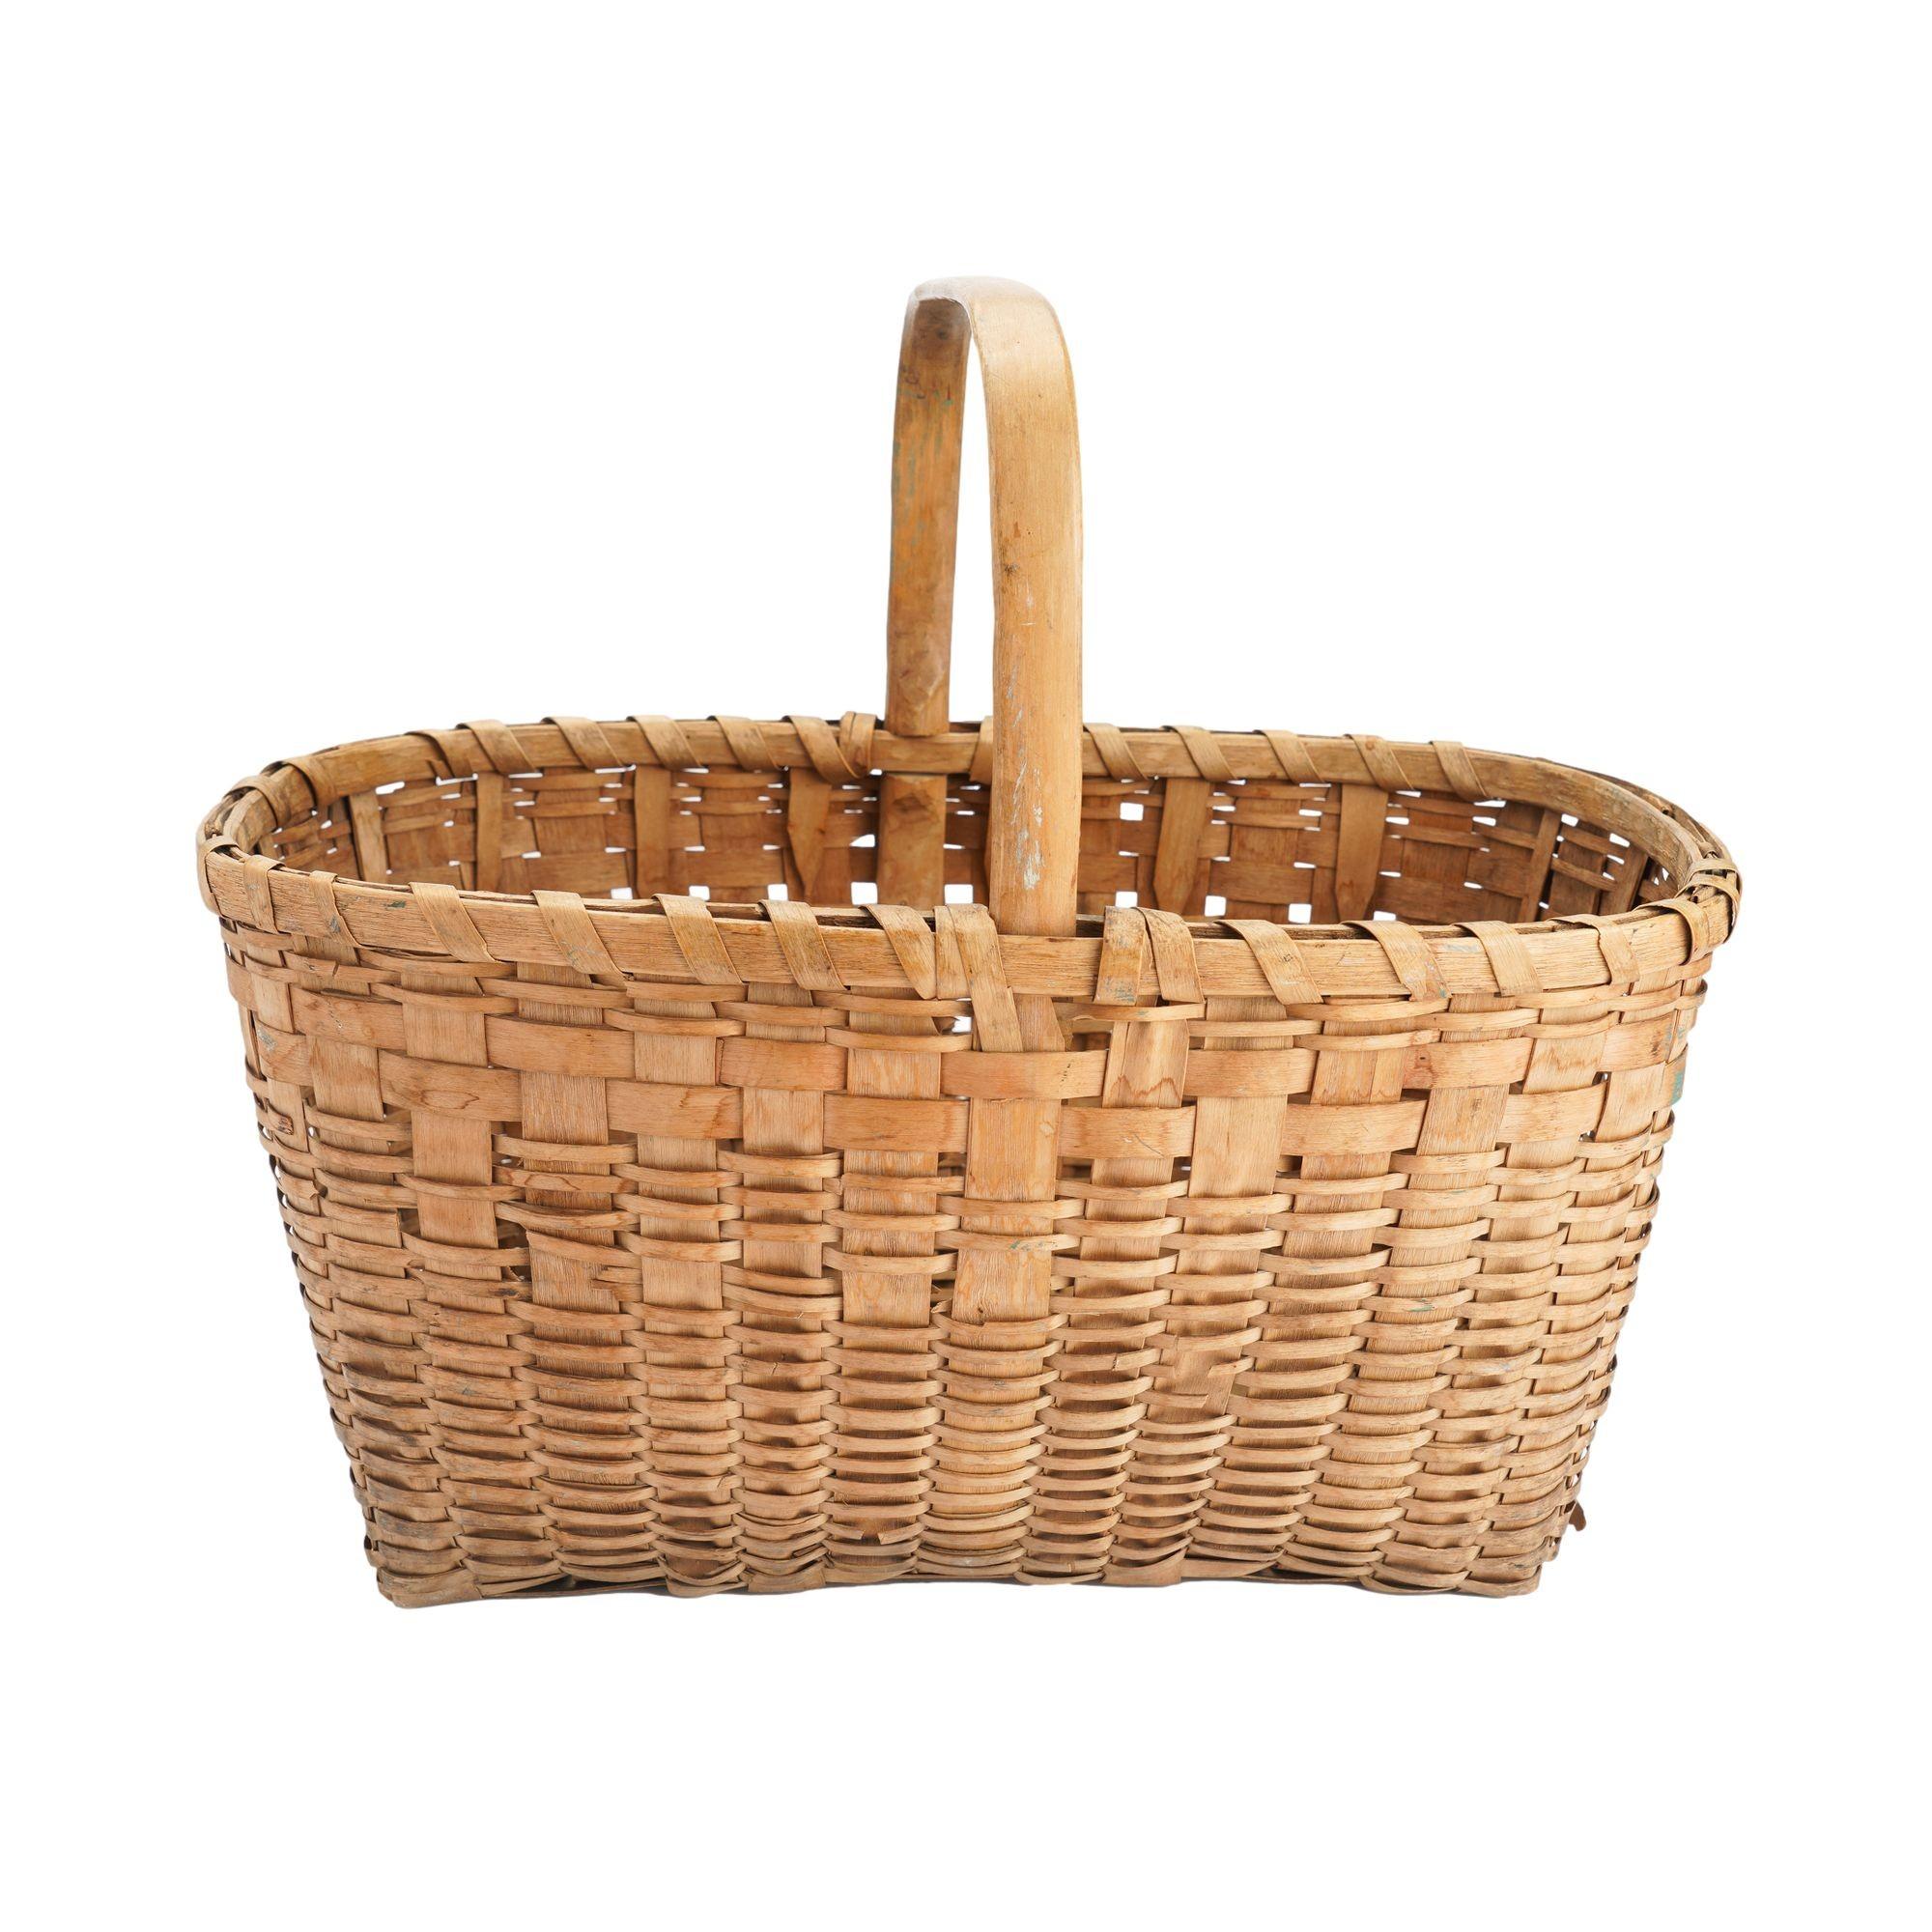 Native American woven ash splint basket with carved & bent loop handle flattened at the apex. The rim of the basket is comprised of two carved & bent ash splints with ash stays, woven from either side of the rim making a woven splint base for the